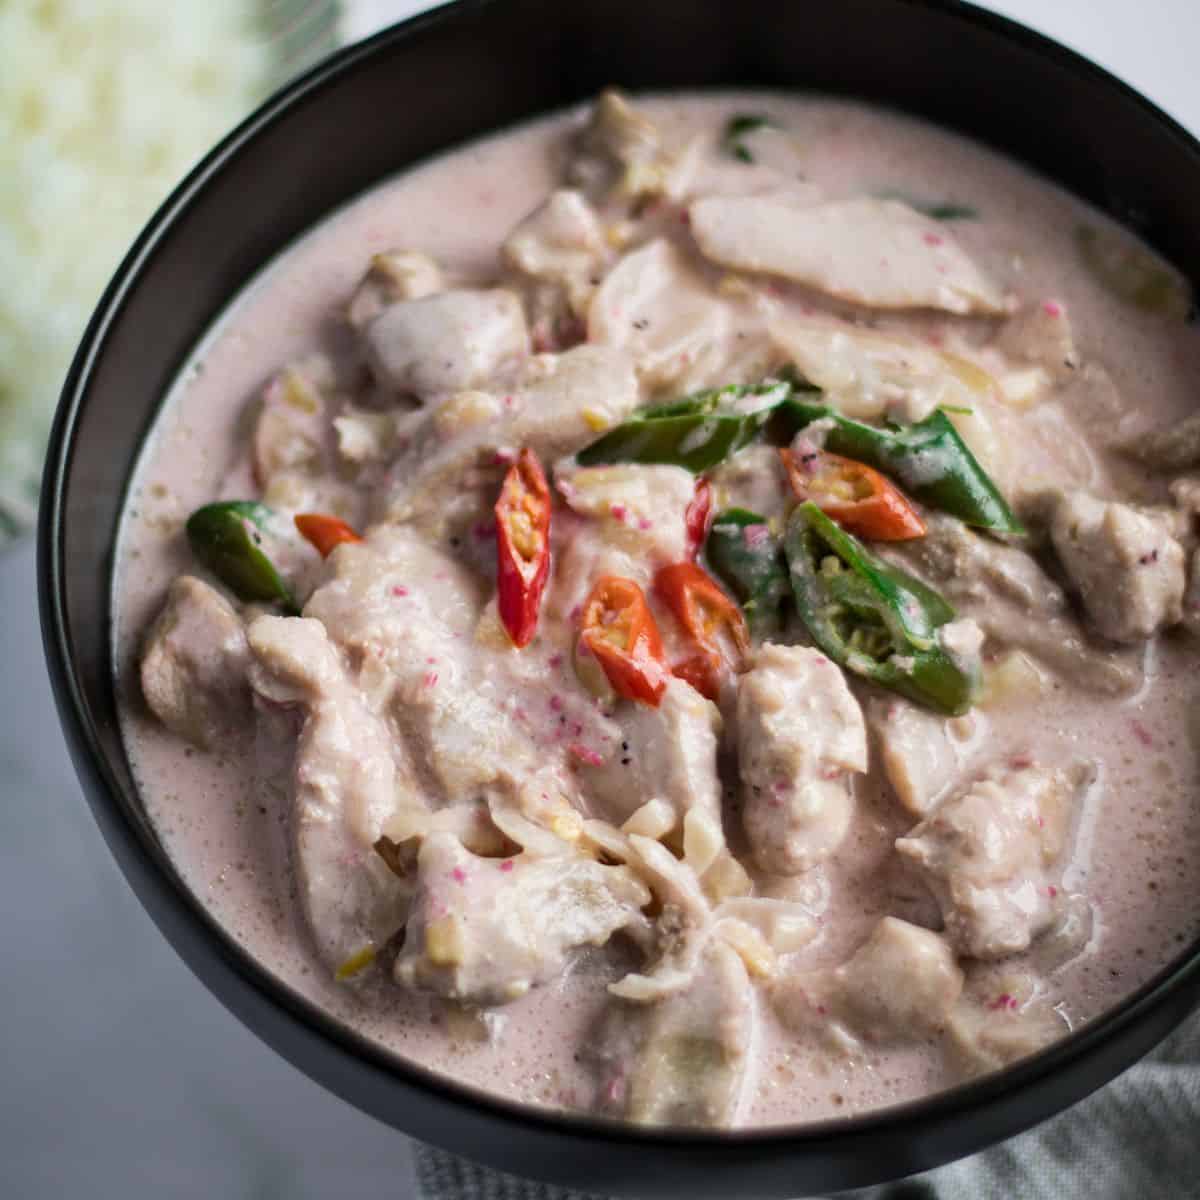 Finish dish of chicken bicol Express in a black bowl.